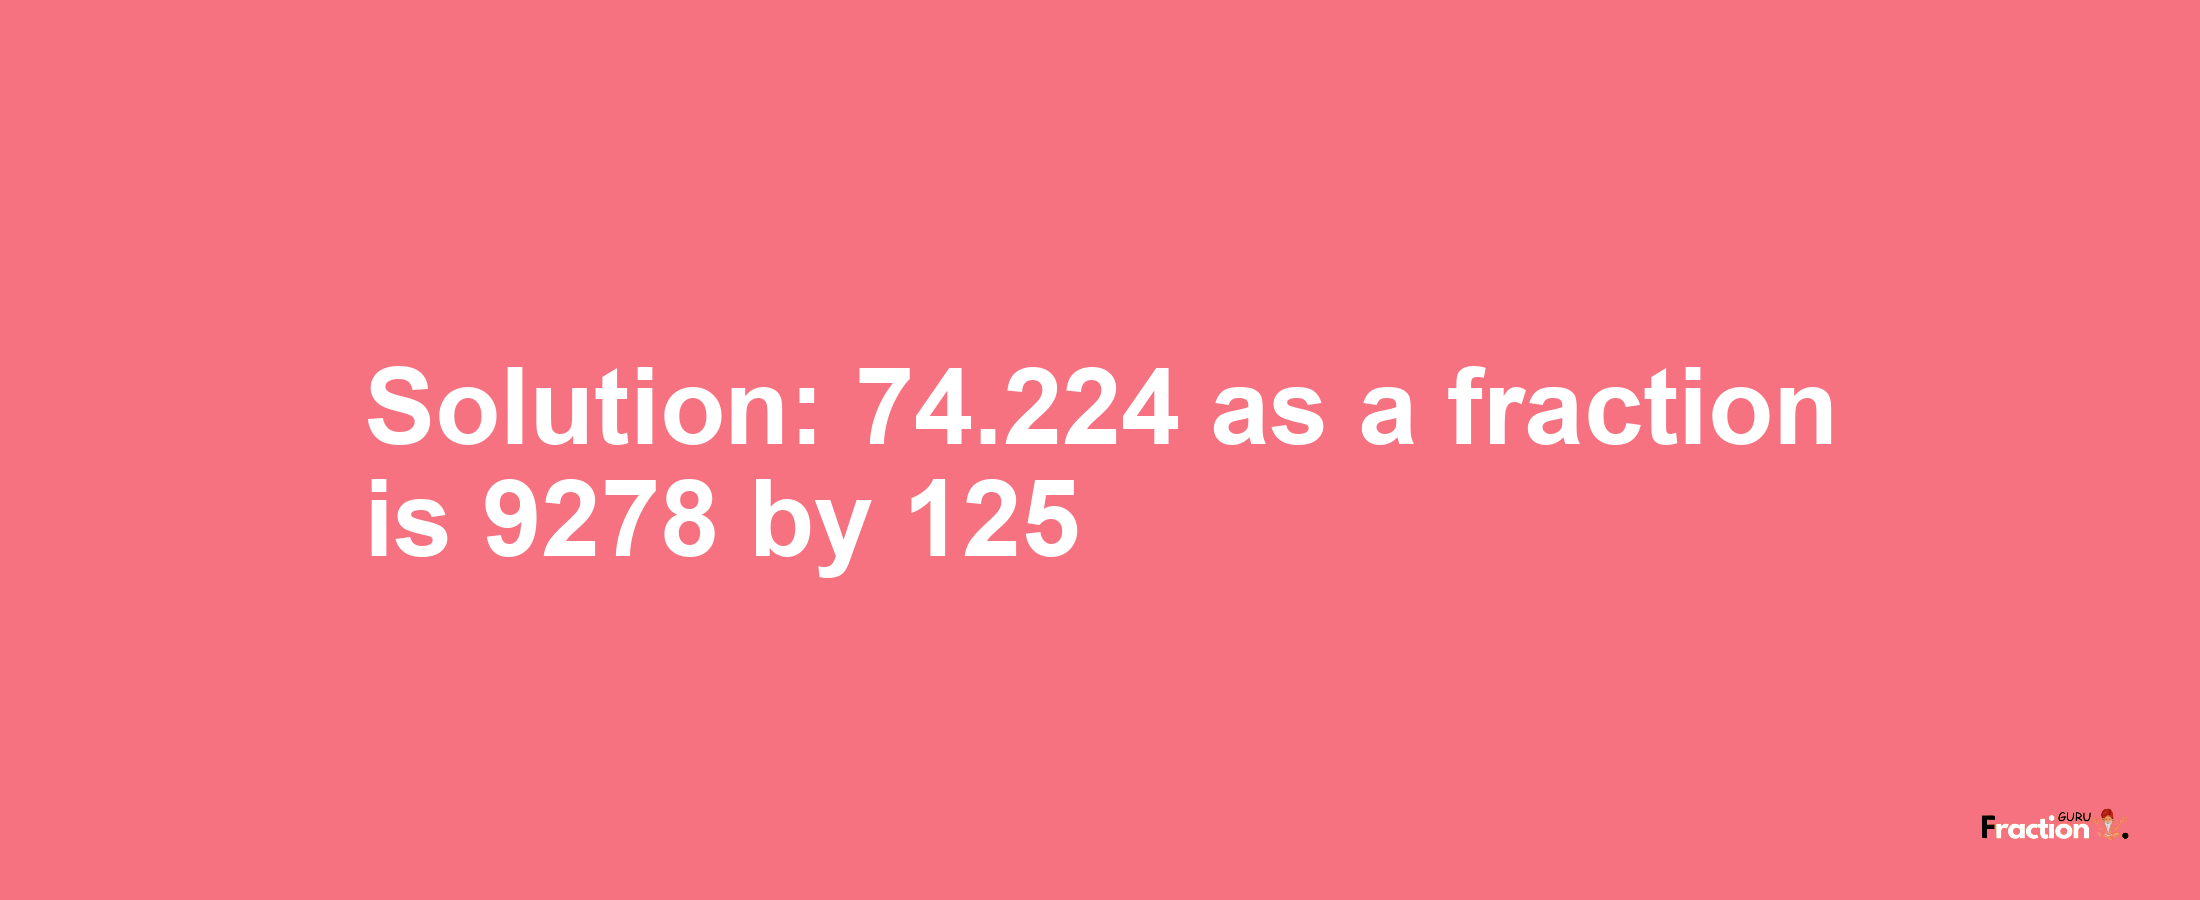 Solution:74.224 as a fraction is 9278/125